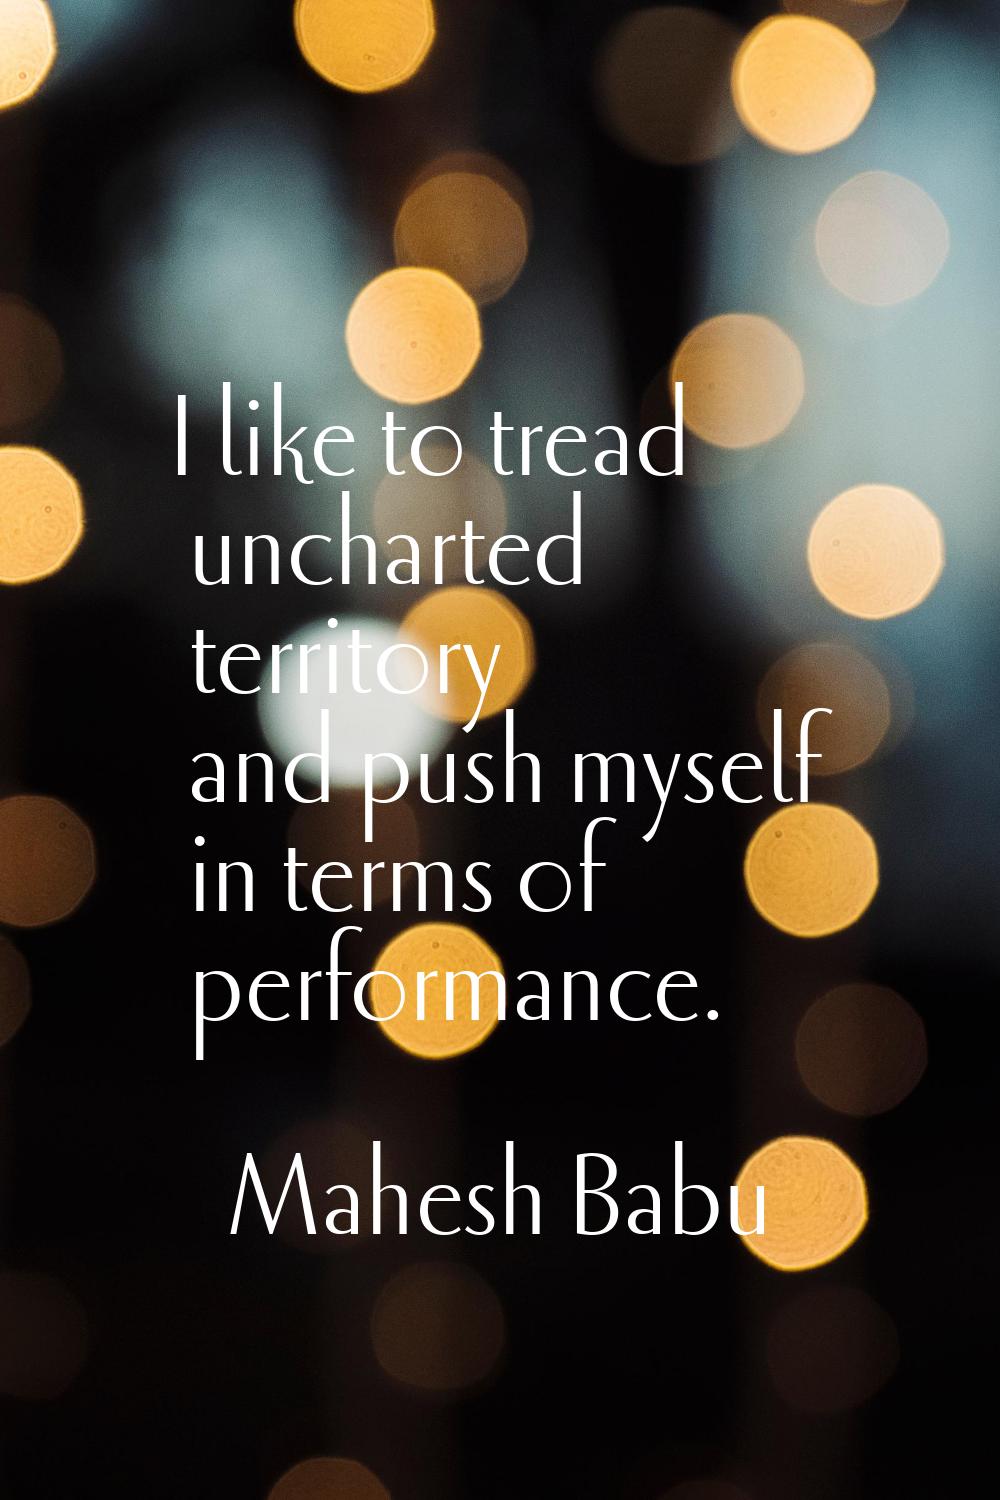 I like to tread uncharted territory and push myself in terms of performance.